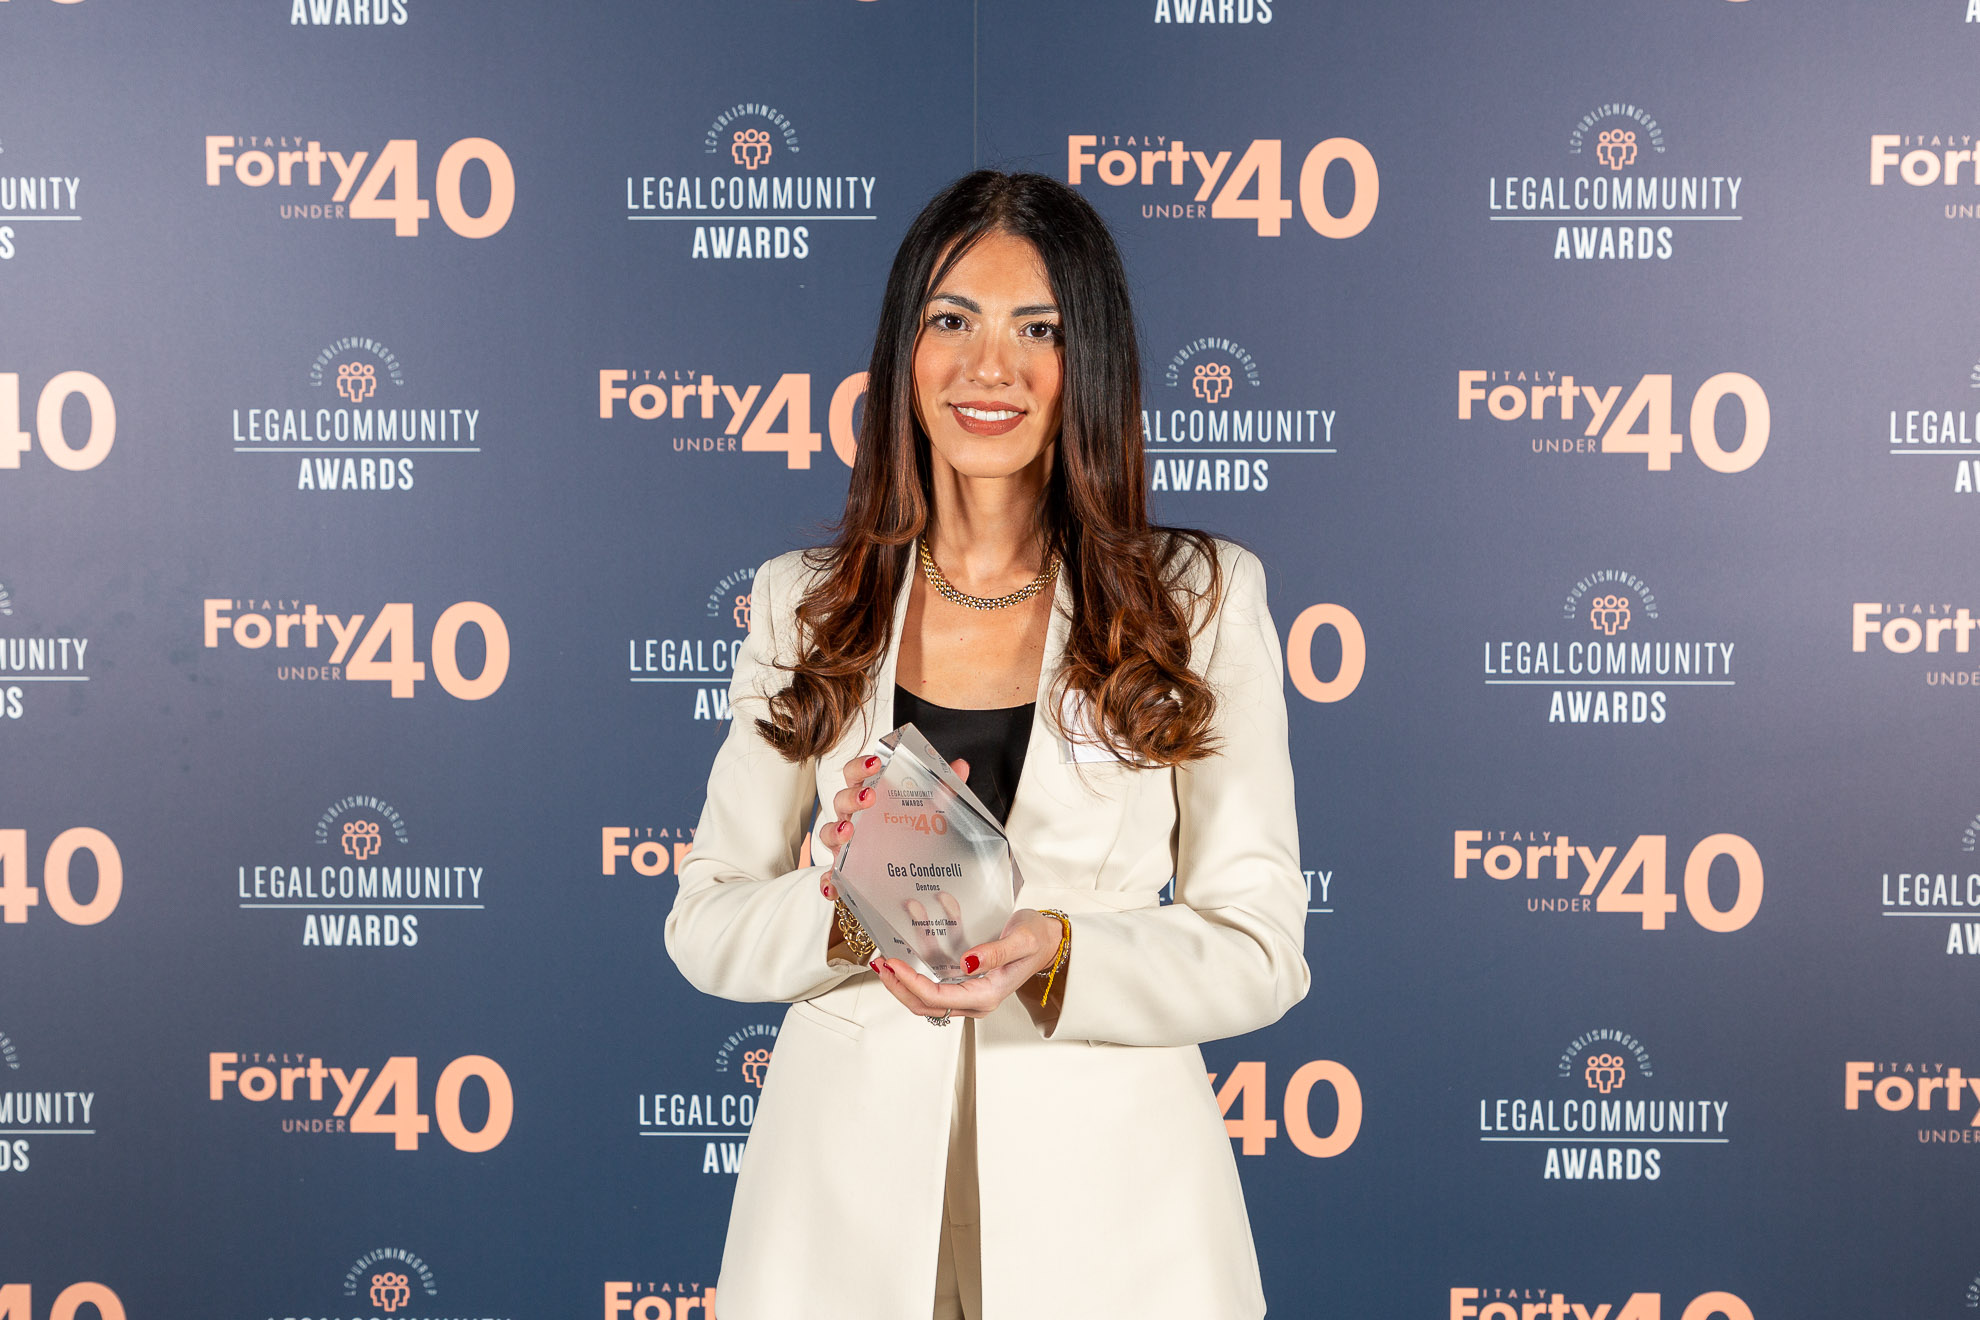 Gea Condorelli standing in front of a wall and holding an Legal Community award in her hands